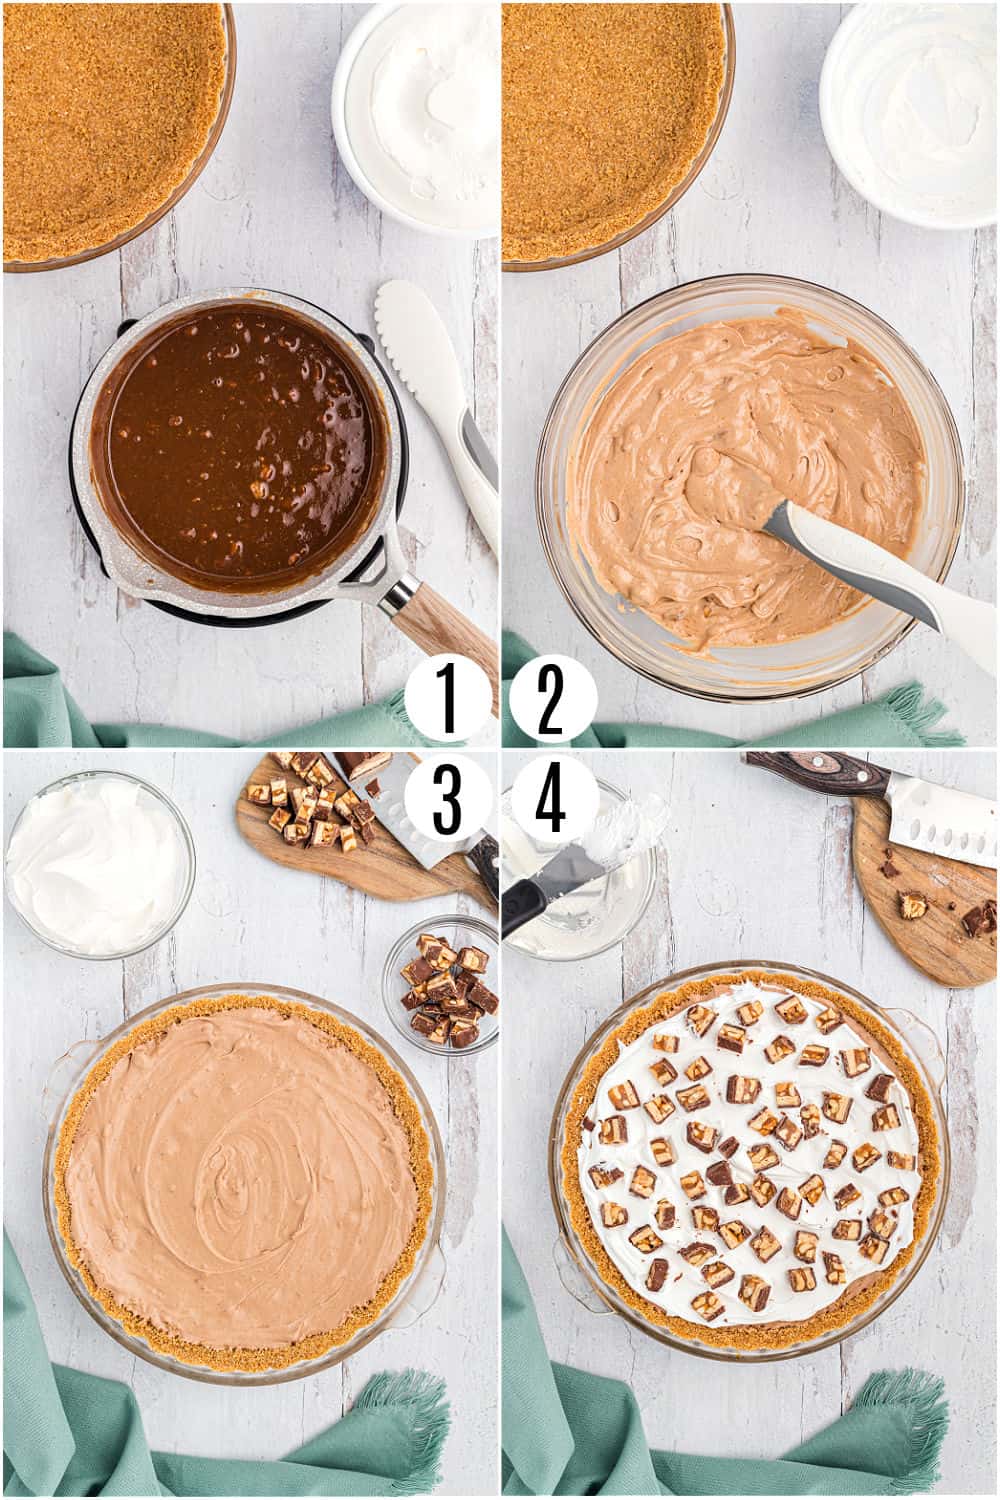 Step by step photos showing how to make snickers pie.